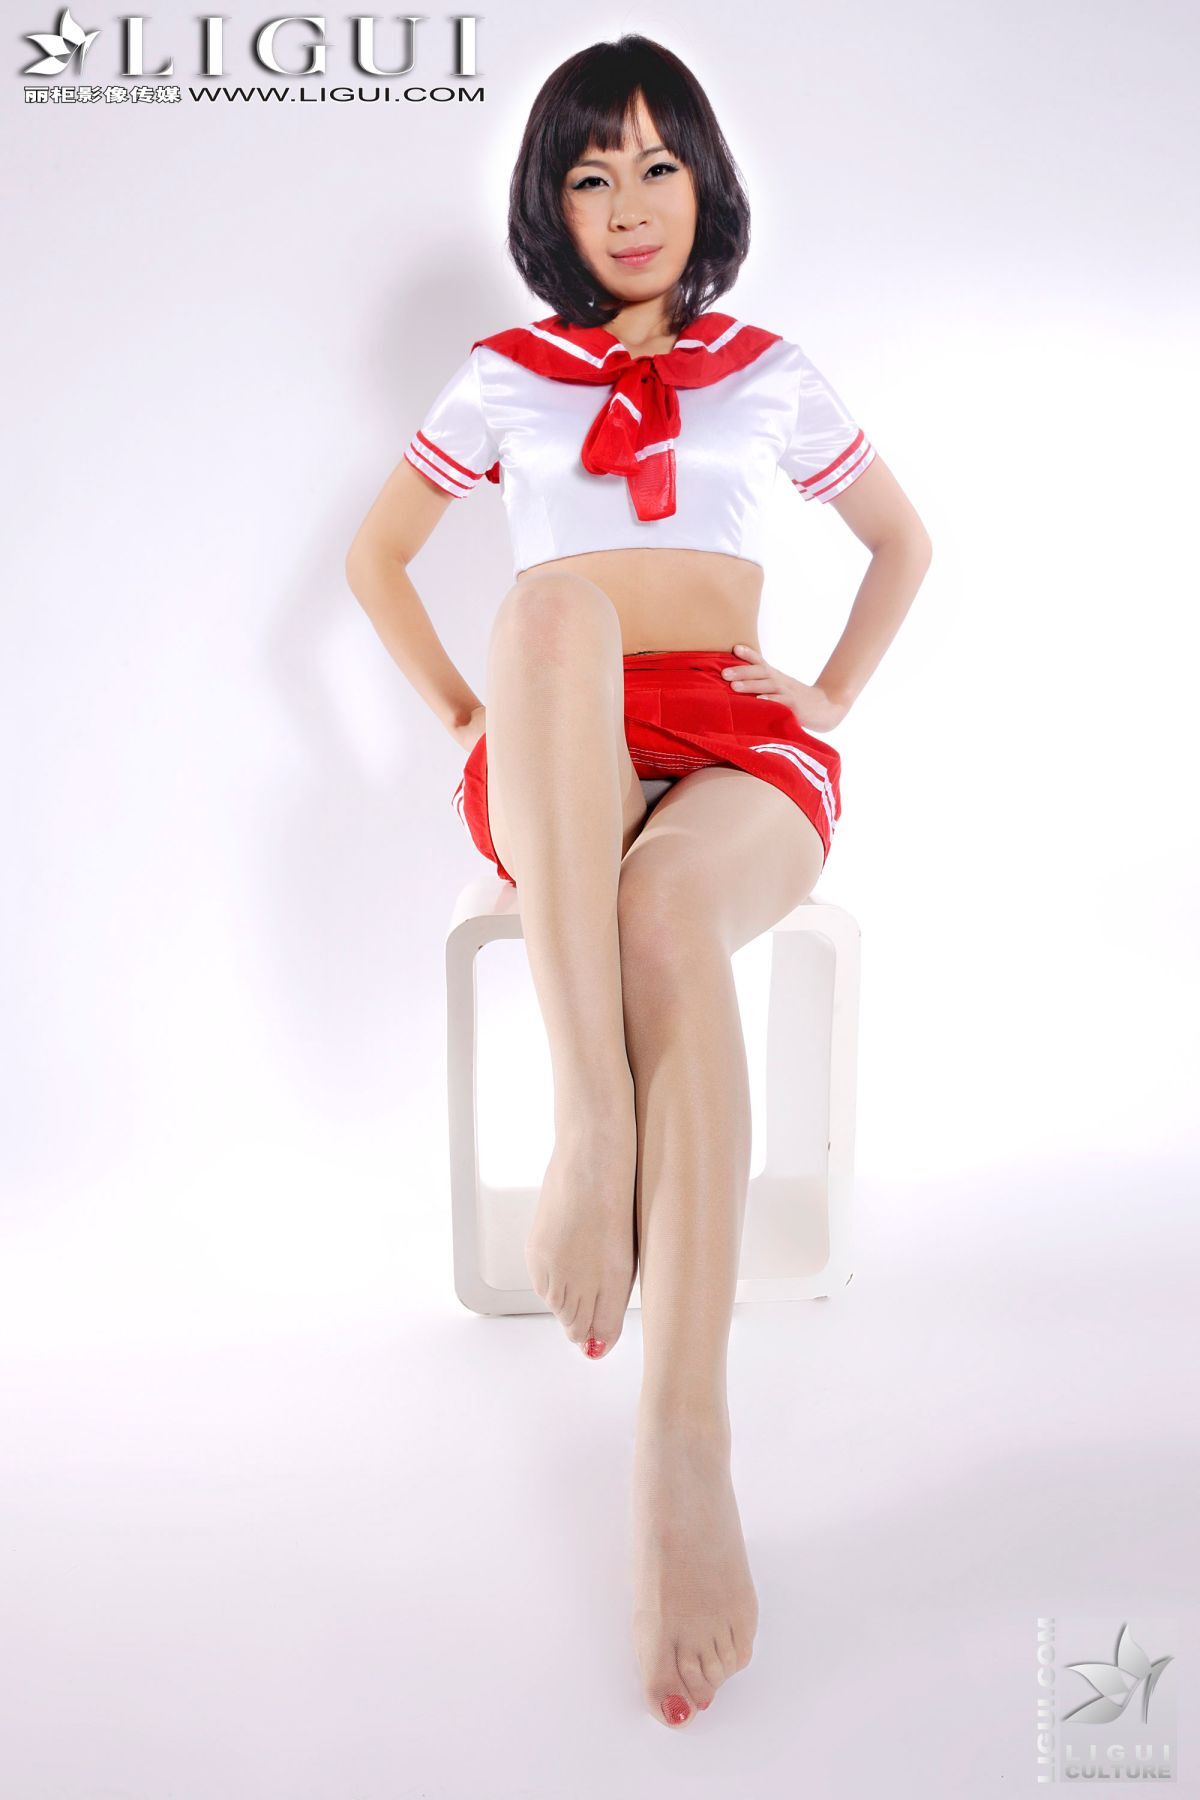 Tian Tian's red sailor suit (Part 2) [ligui] model with beautiful legs and silk stockings